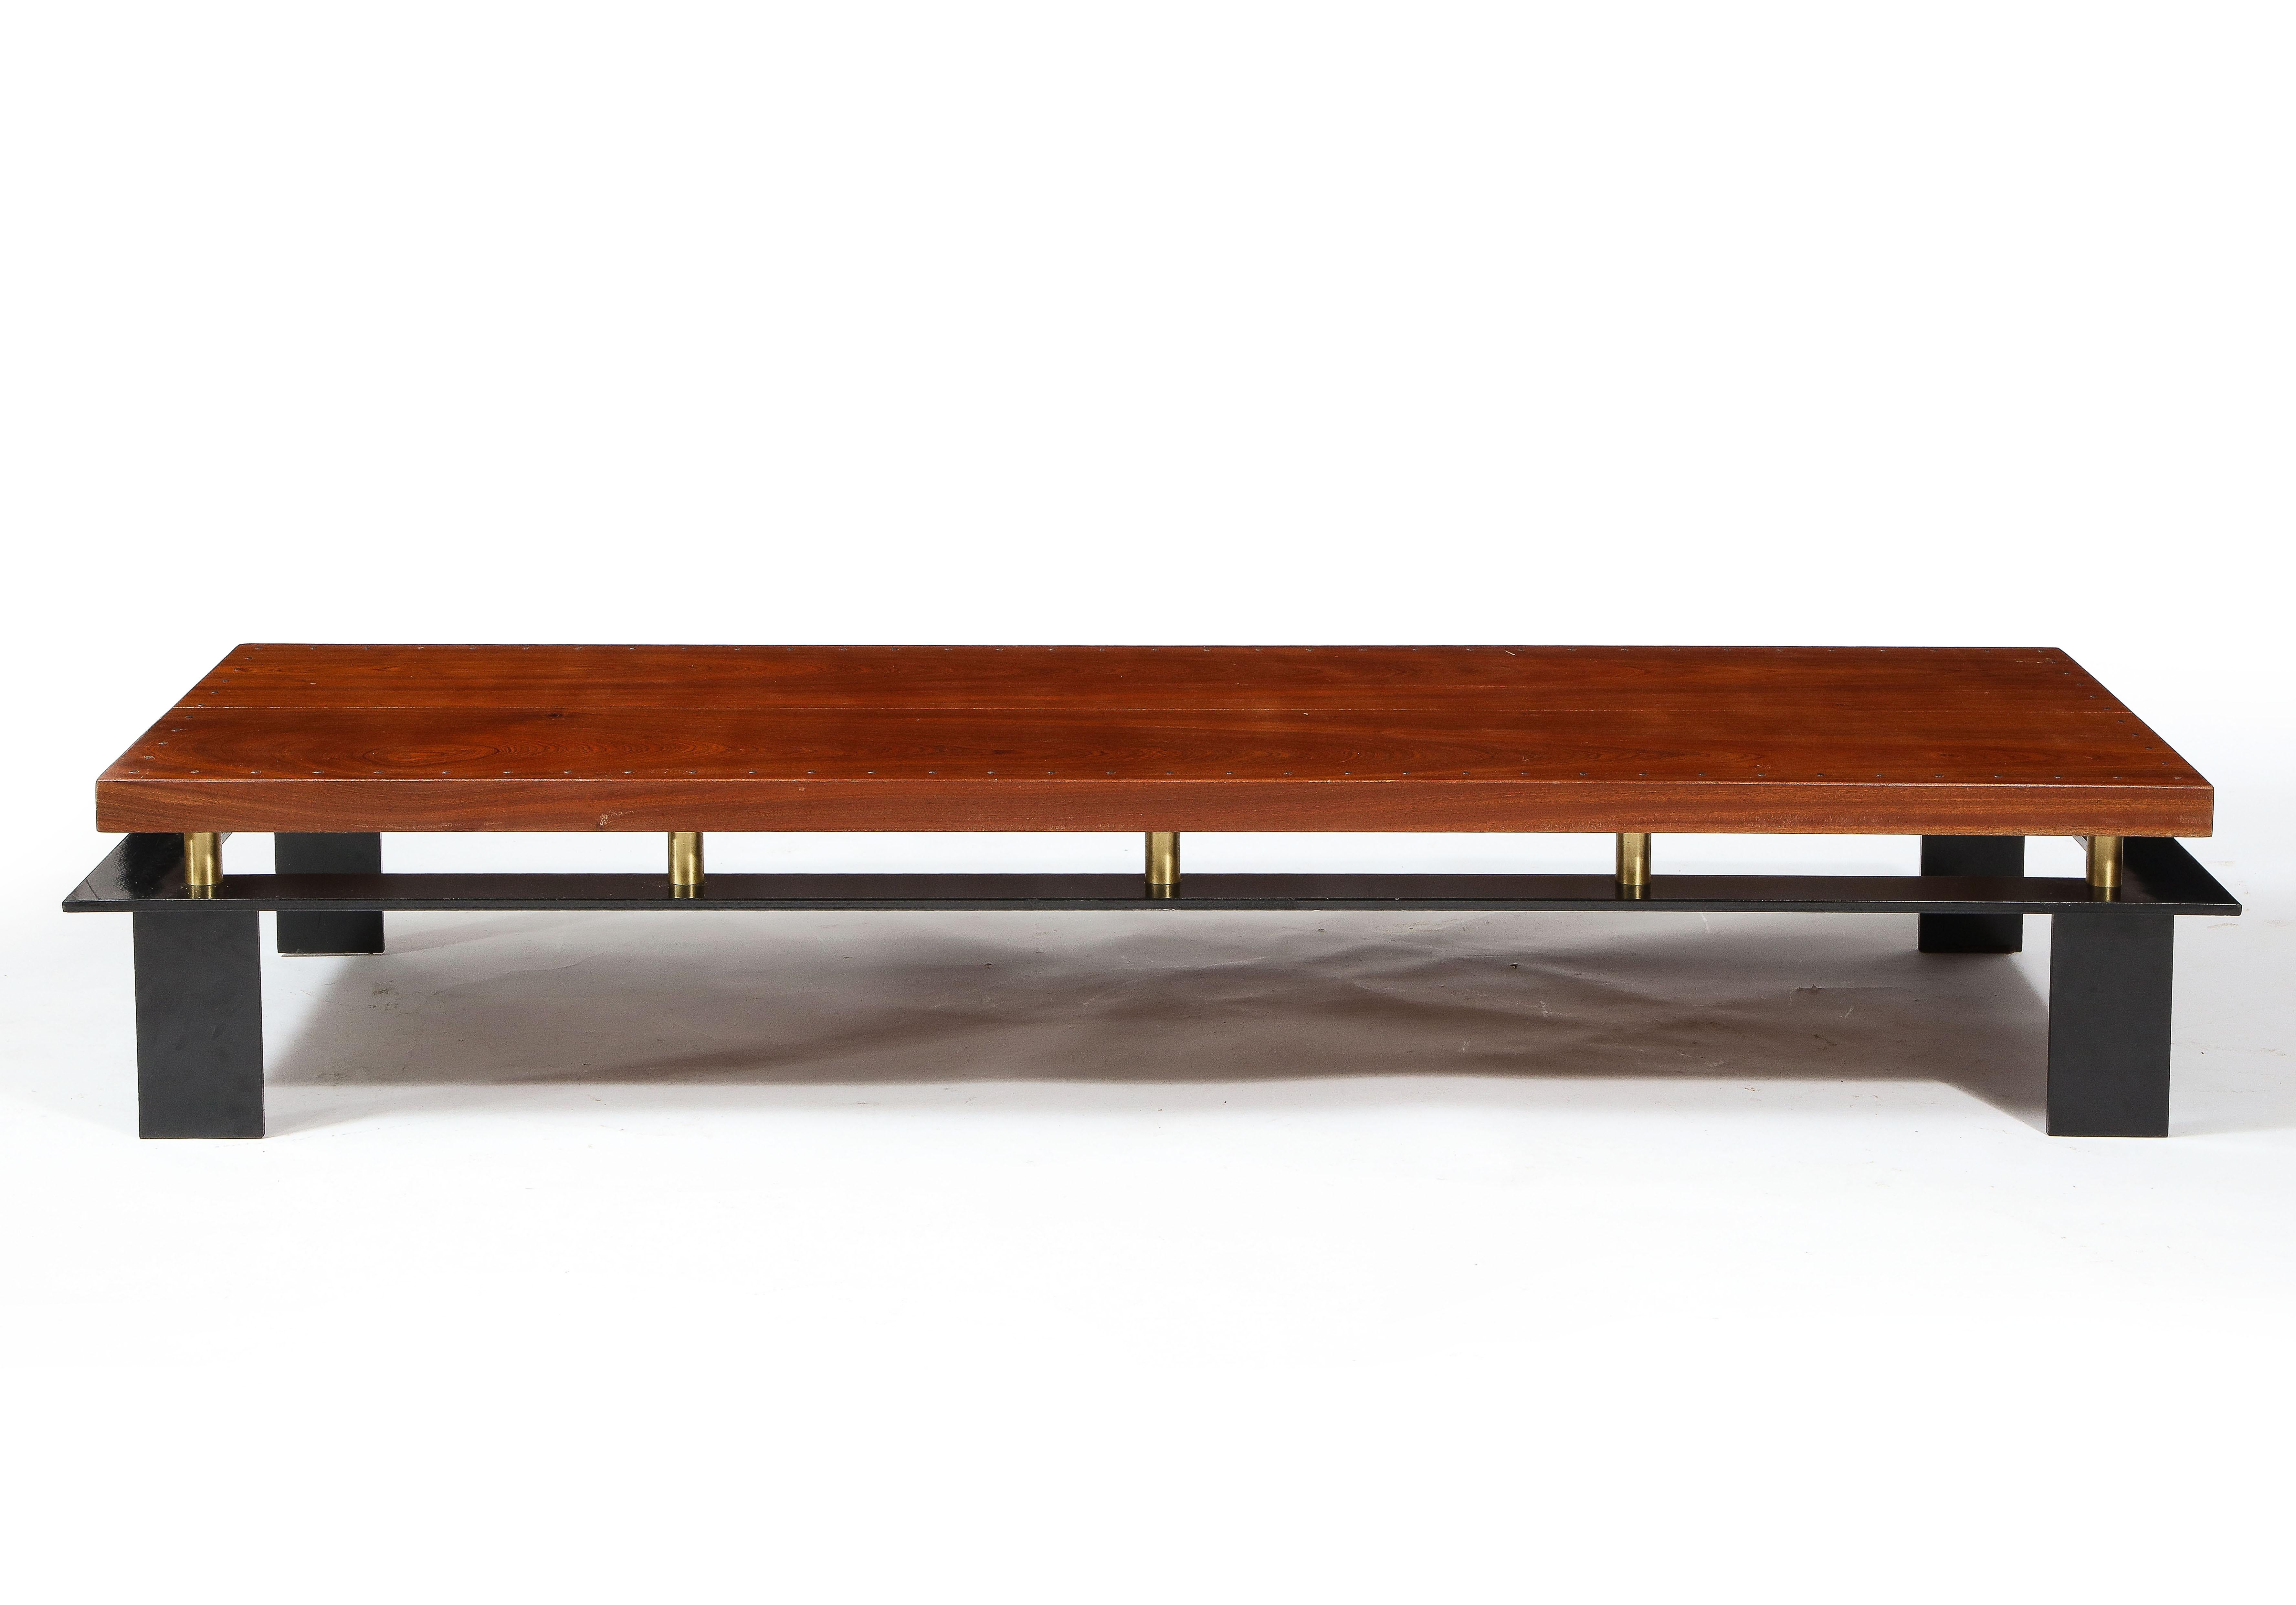 Large Long Low Modernist Steel & Walnut Coffee Table, France 1970's For Sale 7